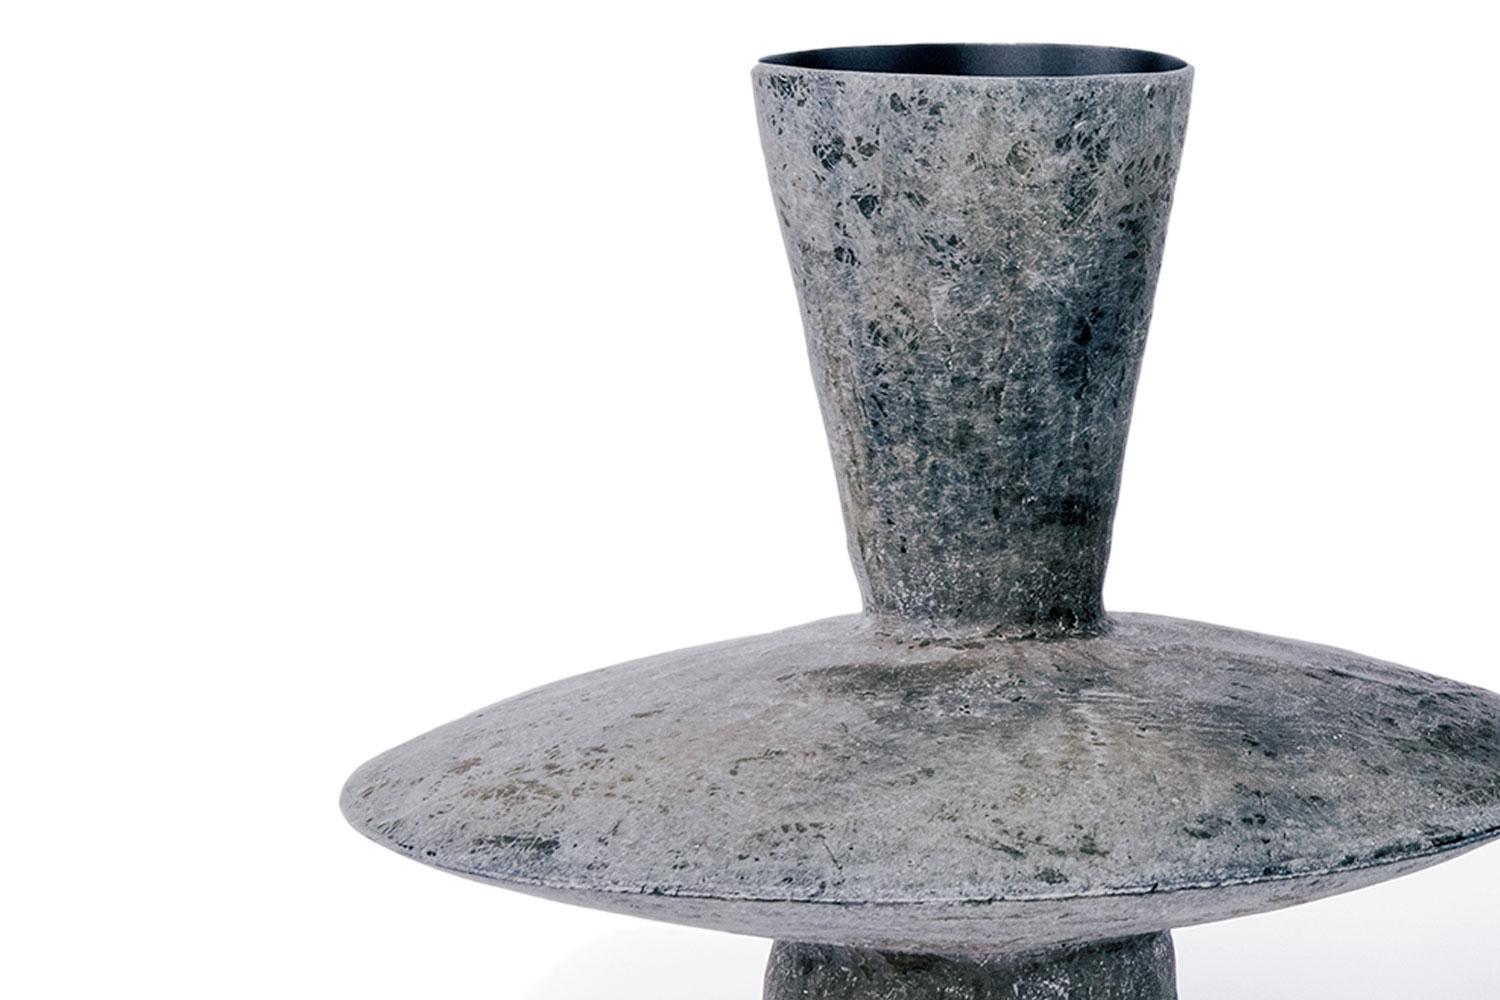 Echo Low By Imperfetto

Made from fiberglass with a raw exterior finish and a black smooth interior basin. The design of peculiar geometries makes this vase a unique object with a distinctive character. Echo high vessel has a round basin for objects